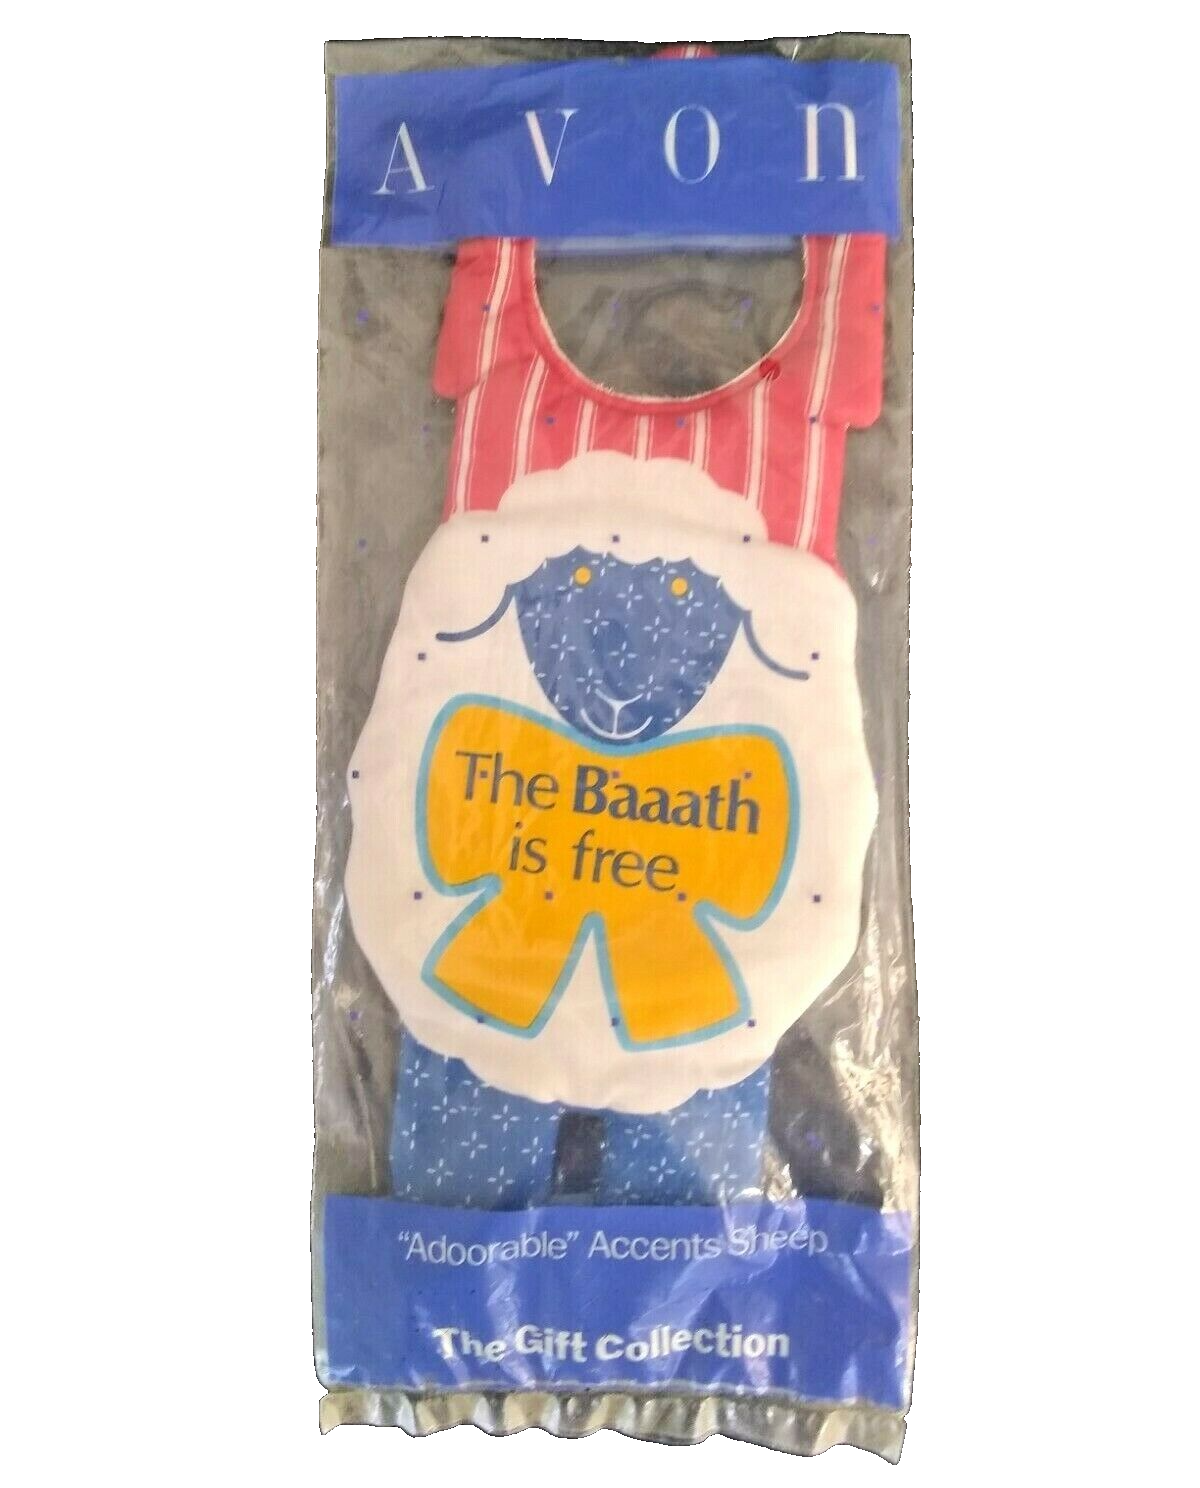 Avon Door Accents Sign The Baaath is Busy or Free Sheep 1989 Vintage - £6.92 GBP